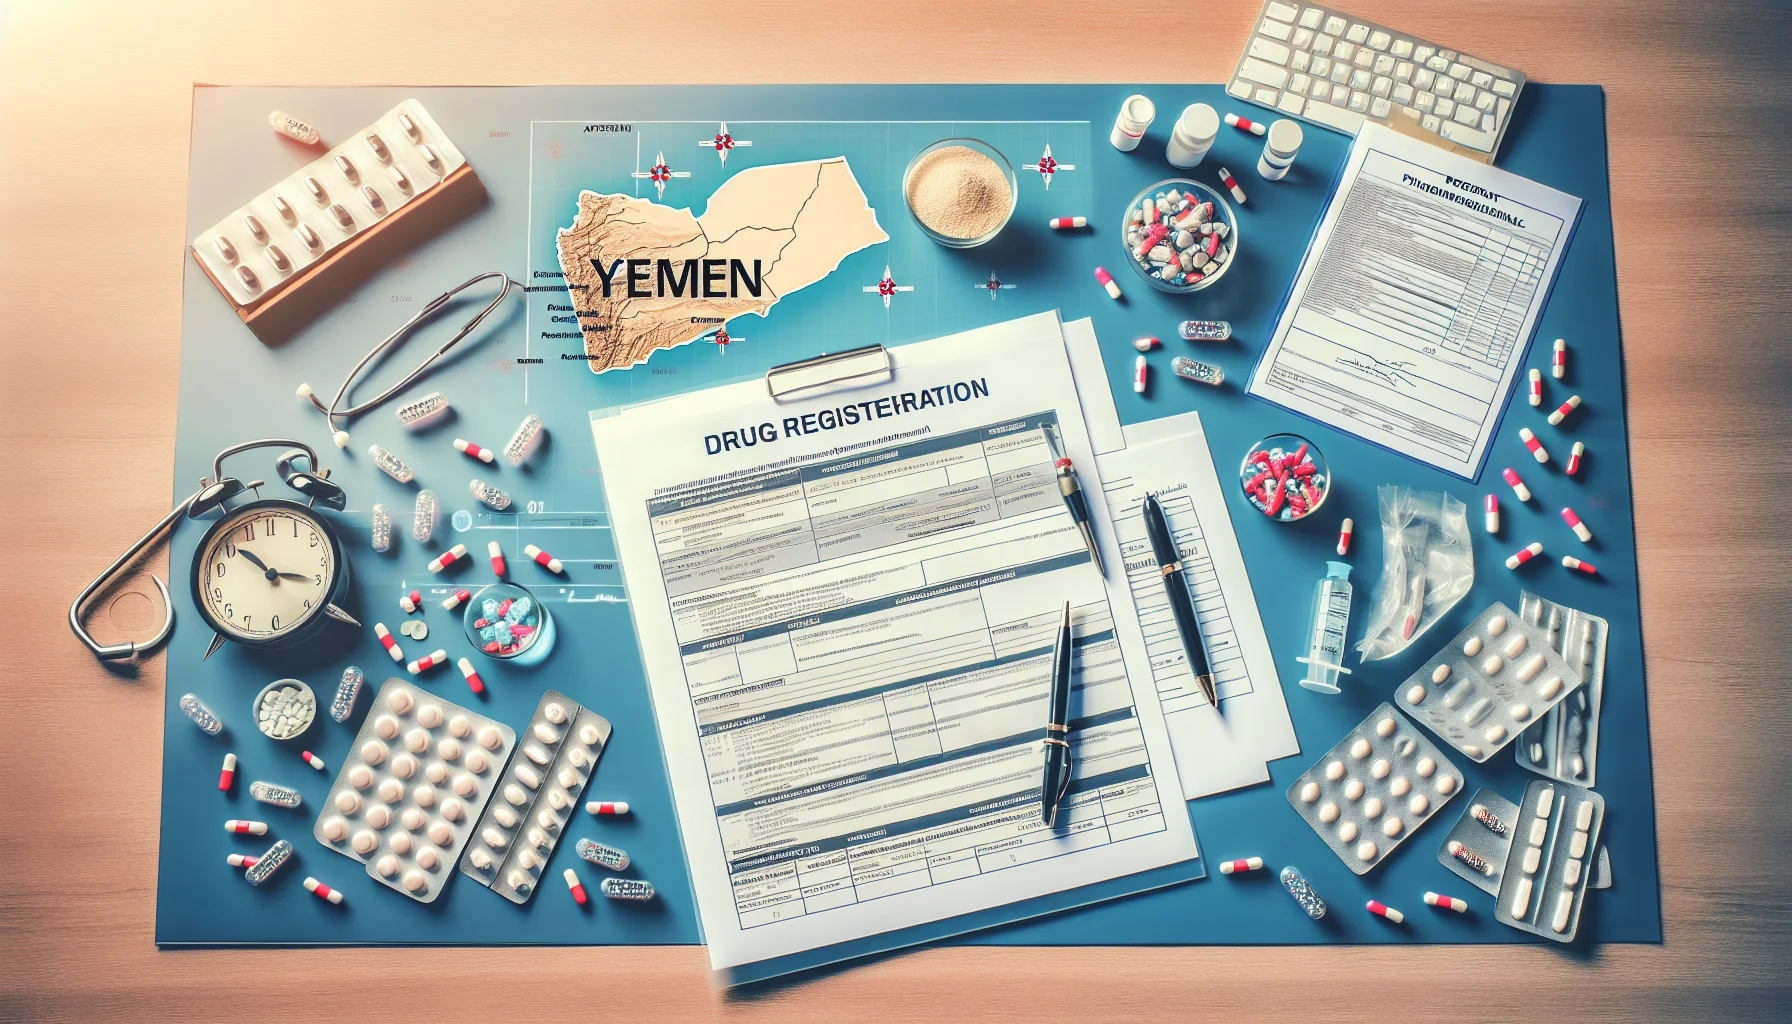 Essential Steps for Registering Pharmaceuticals in Yemen: A How-to Guide